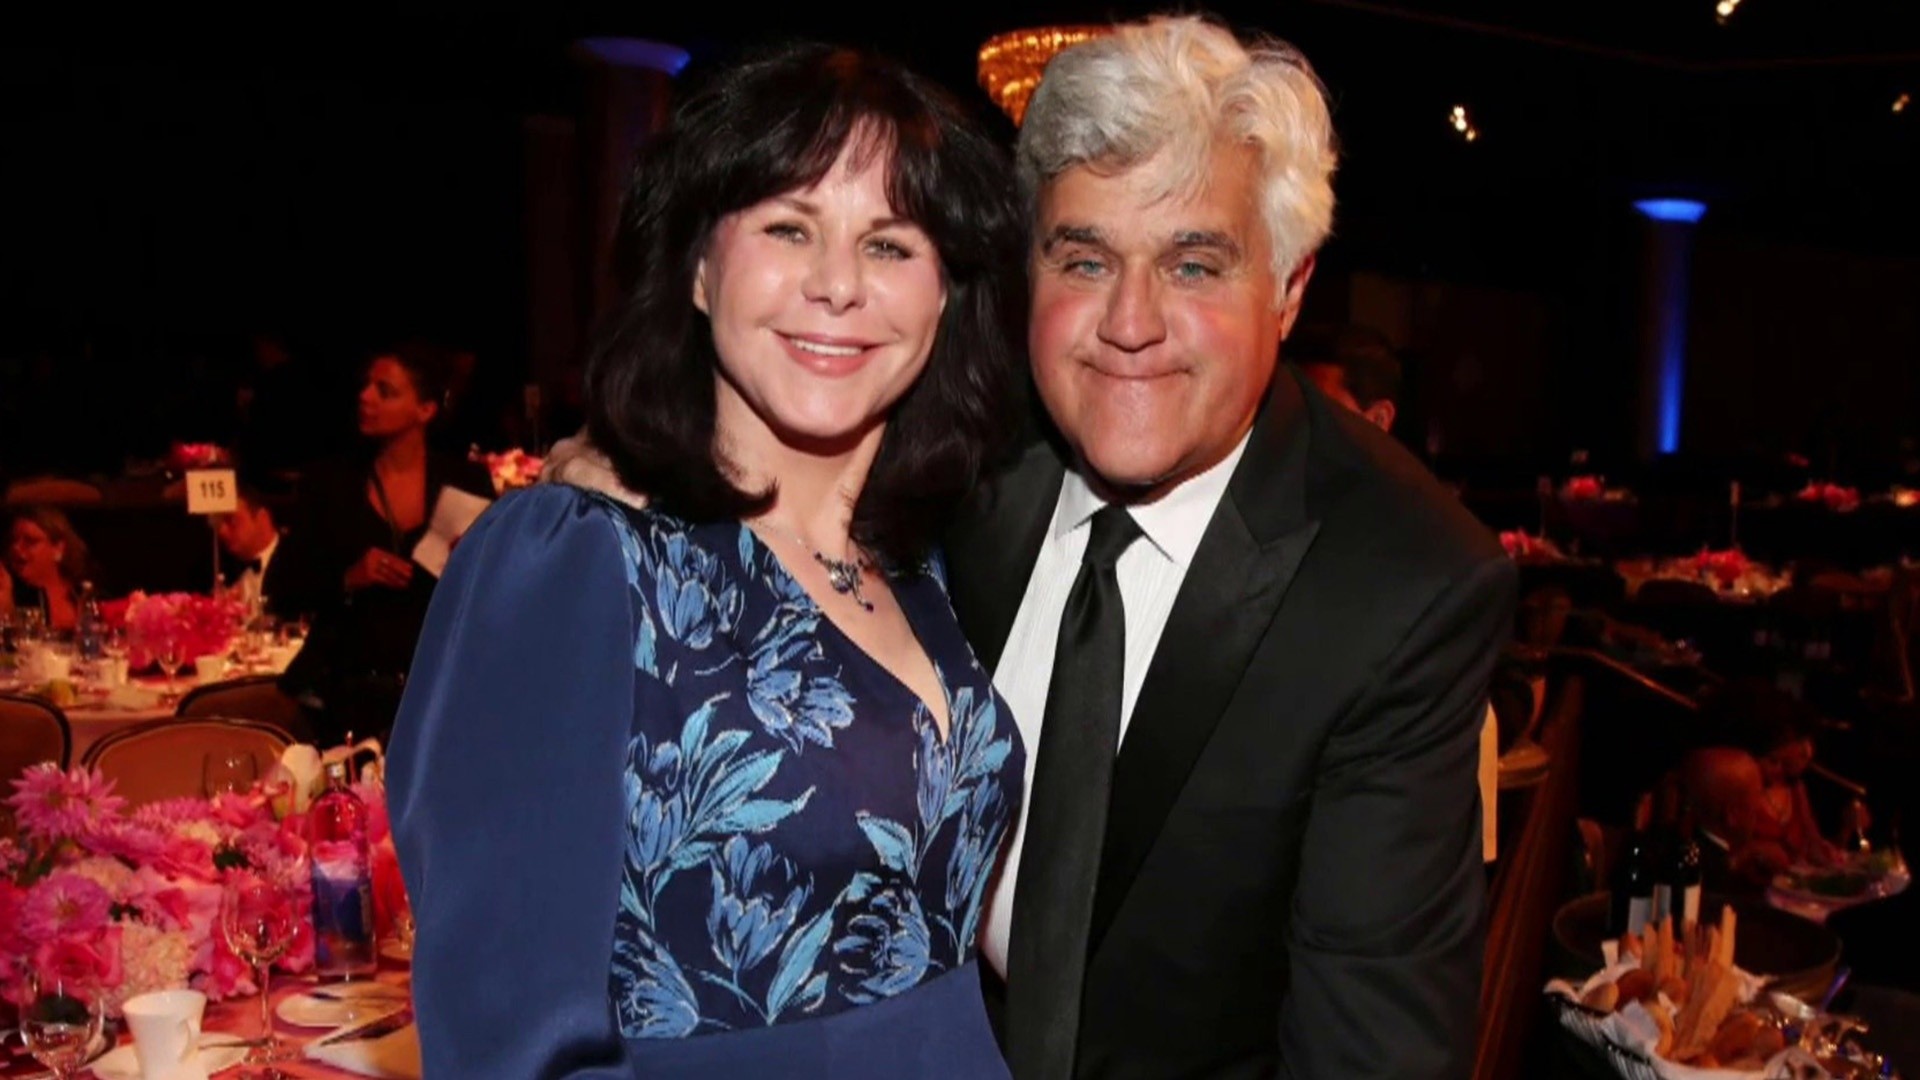 Jay Leno files for conservatorship of wife amid dementia diagnosis